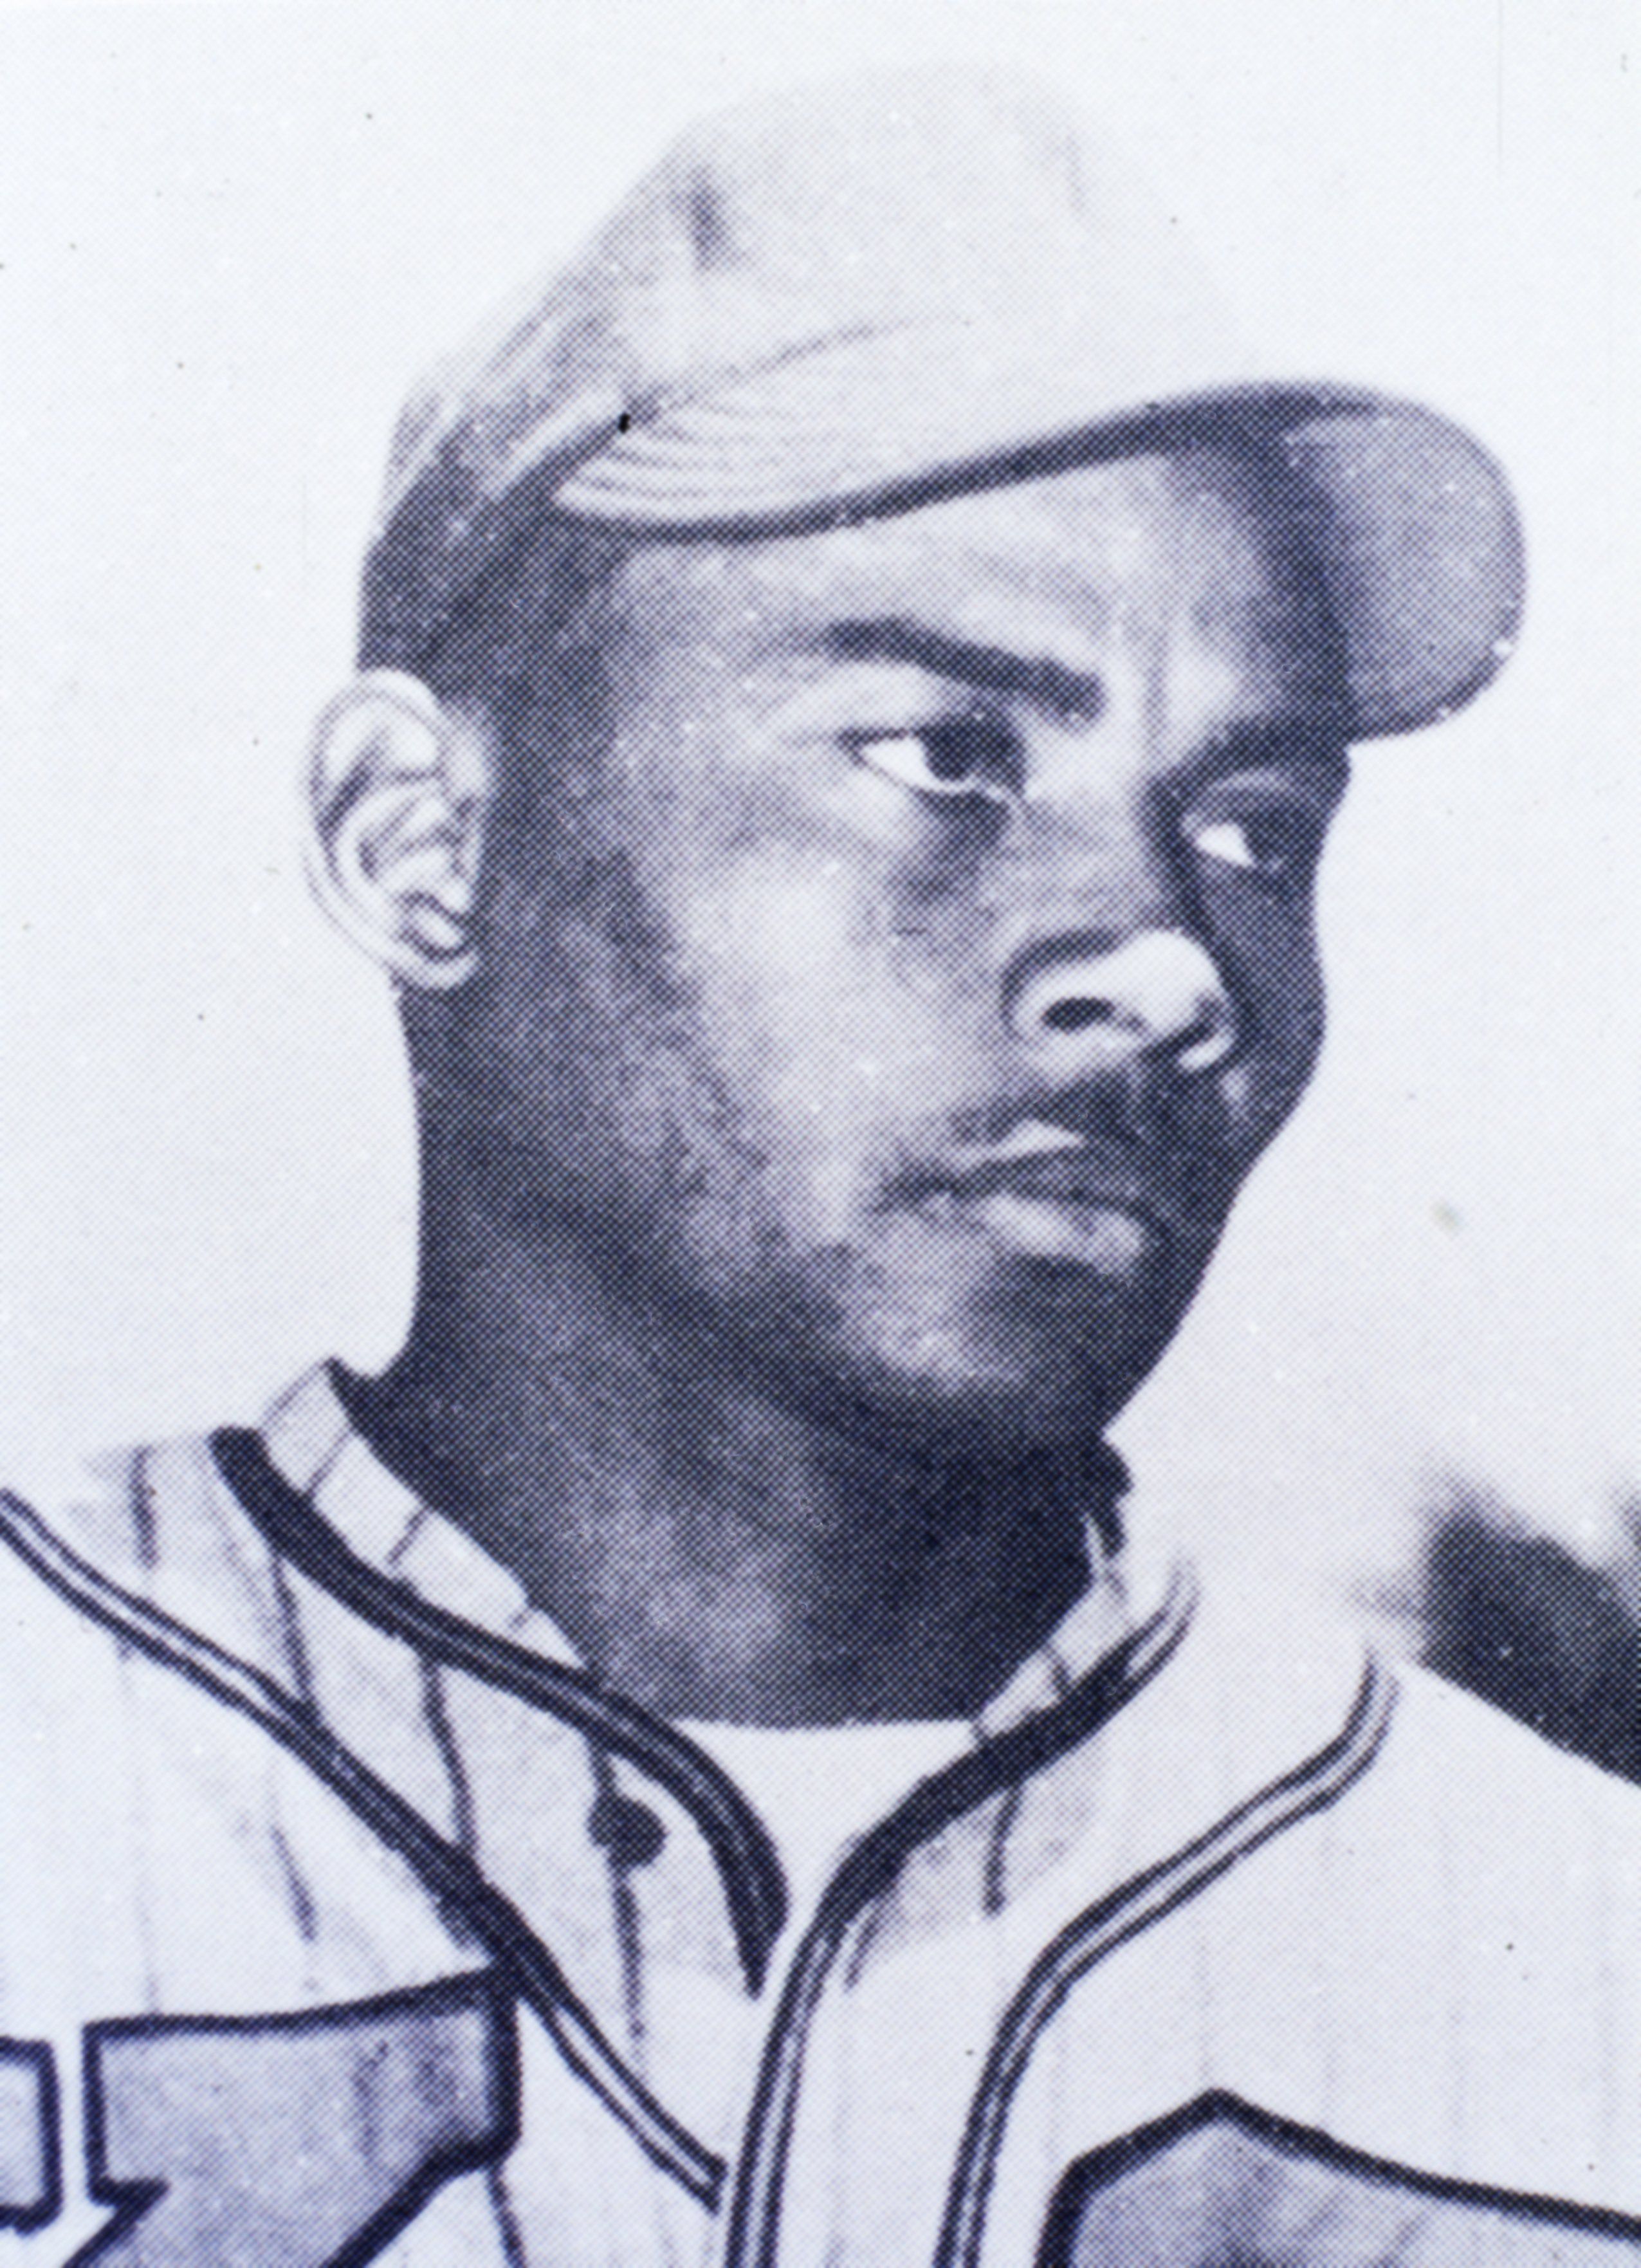 Negro League innovations adopted by MLB